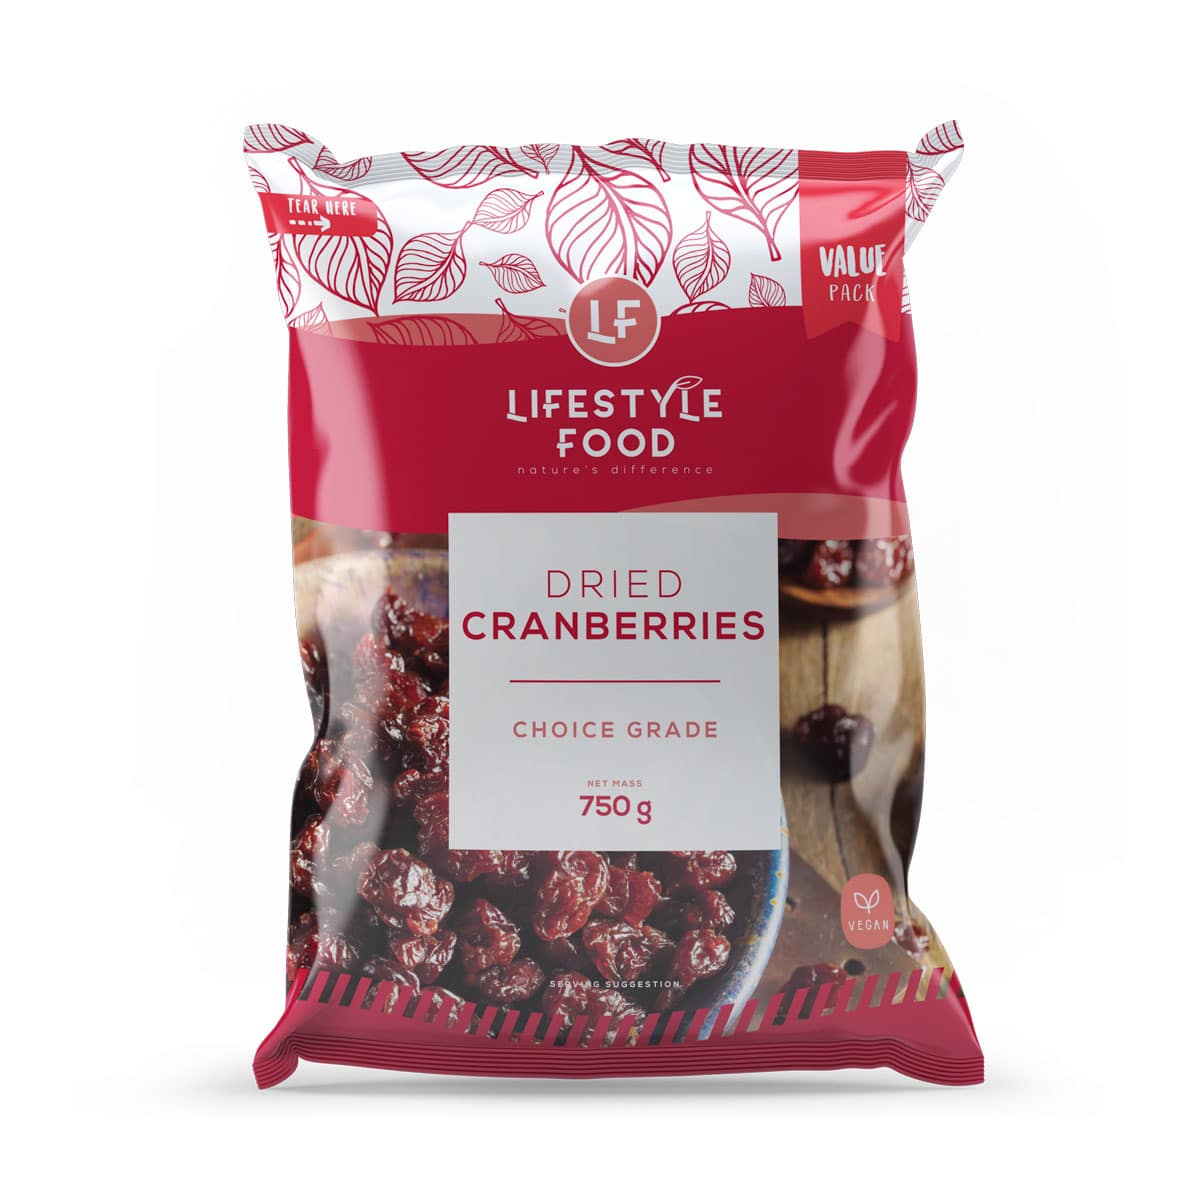 Lifestyle Food Dried Cranberries Choice Grade Value Pack - 750g